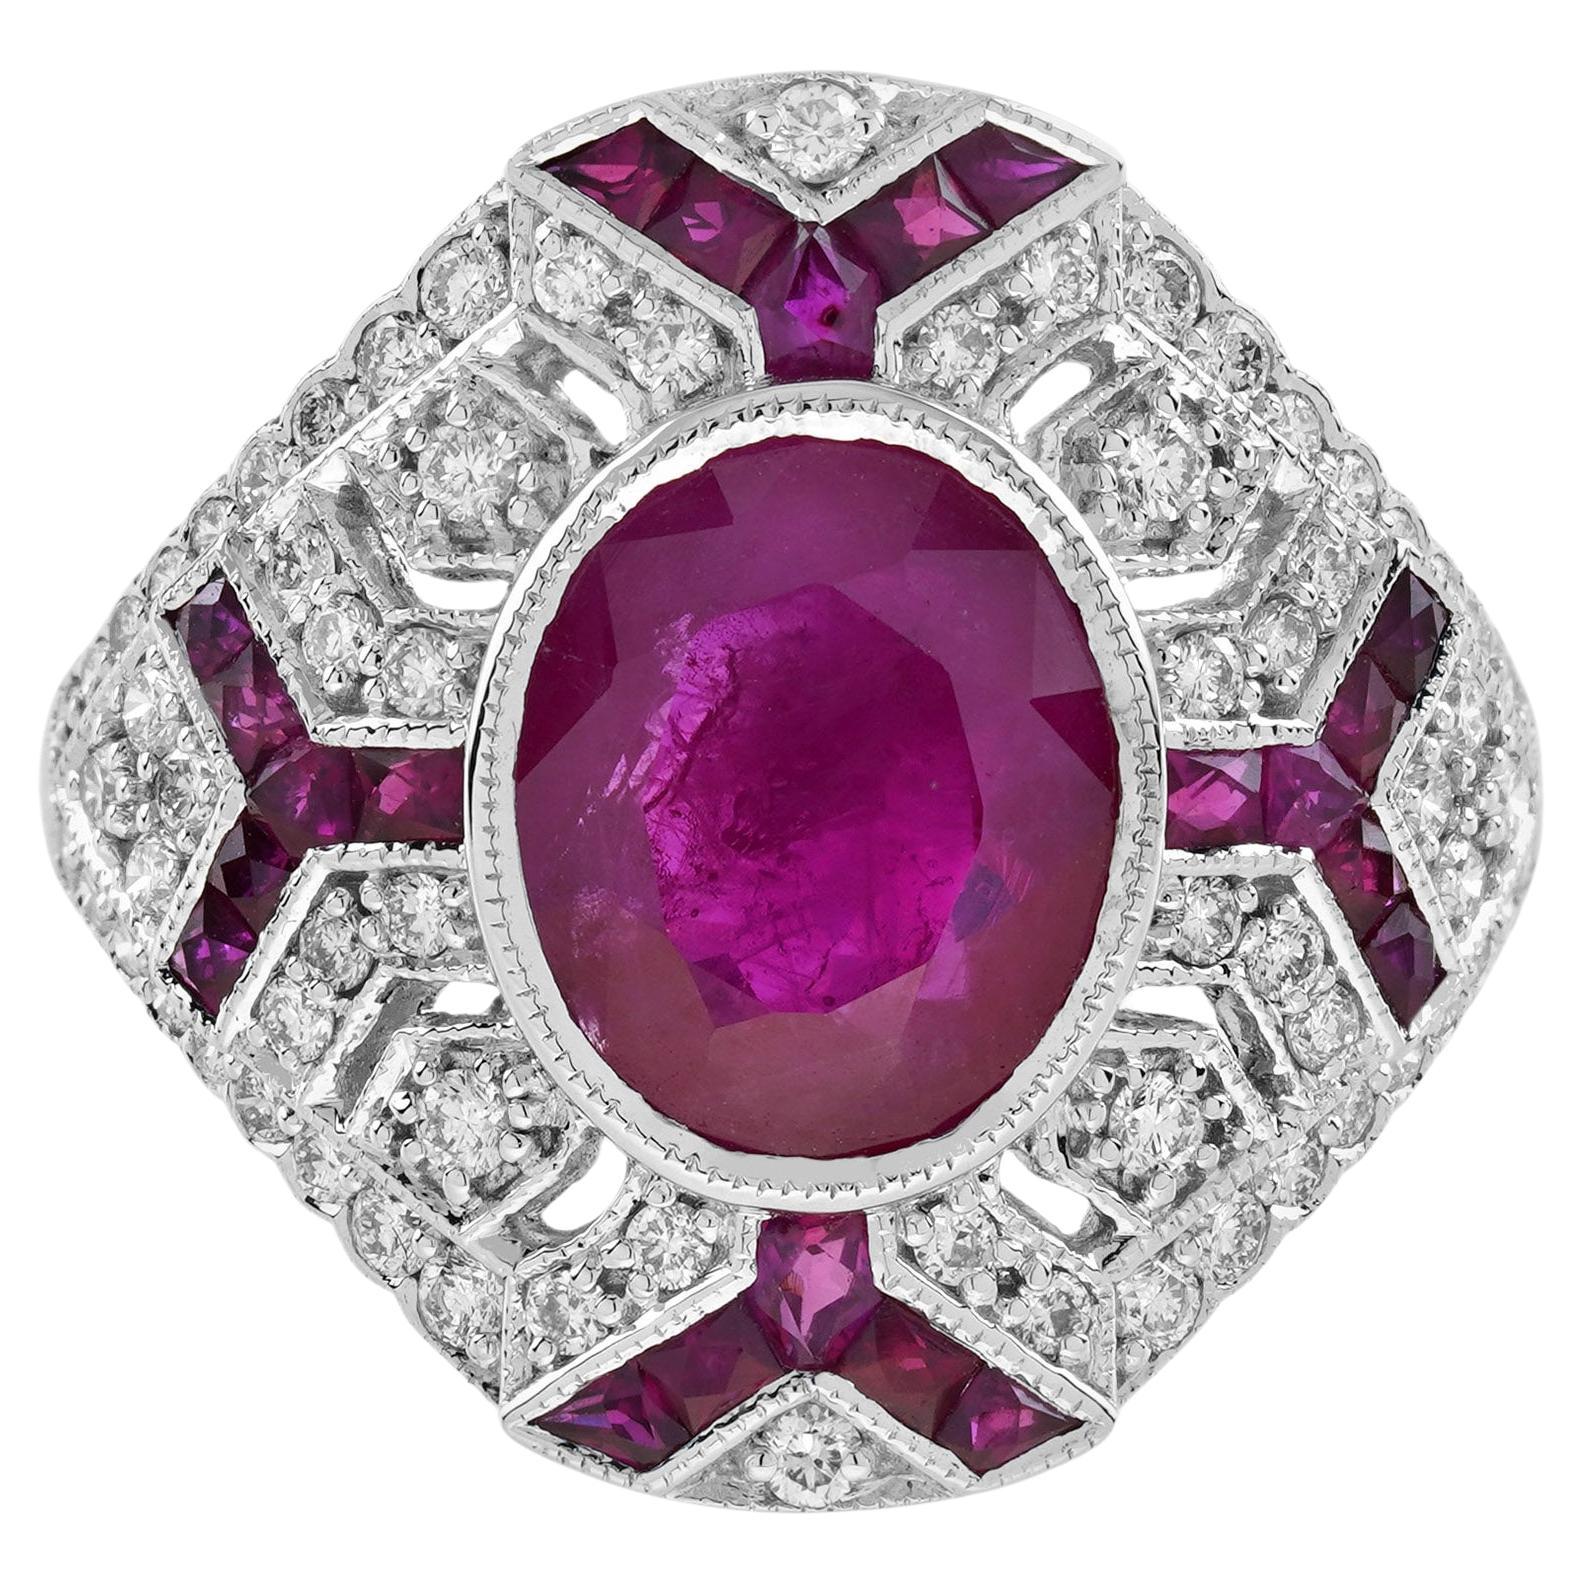 2.37 Ct. Burmese Ruby and Diamond Art Deco Style Halo Ring in 18K White Gold